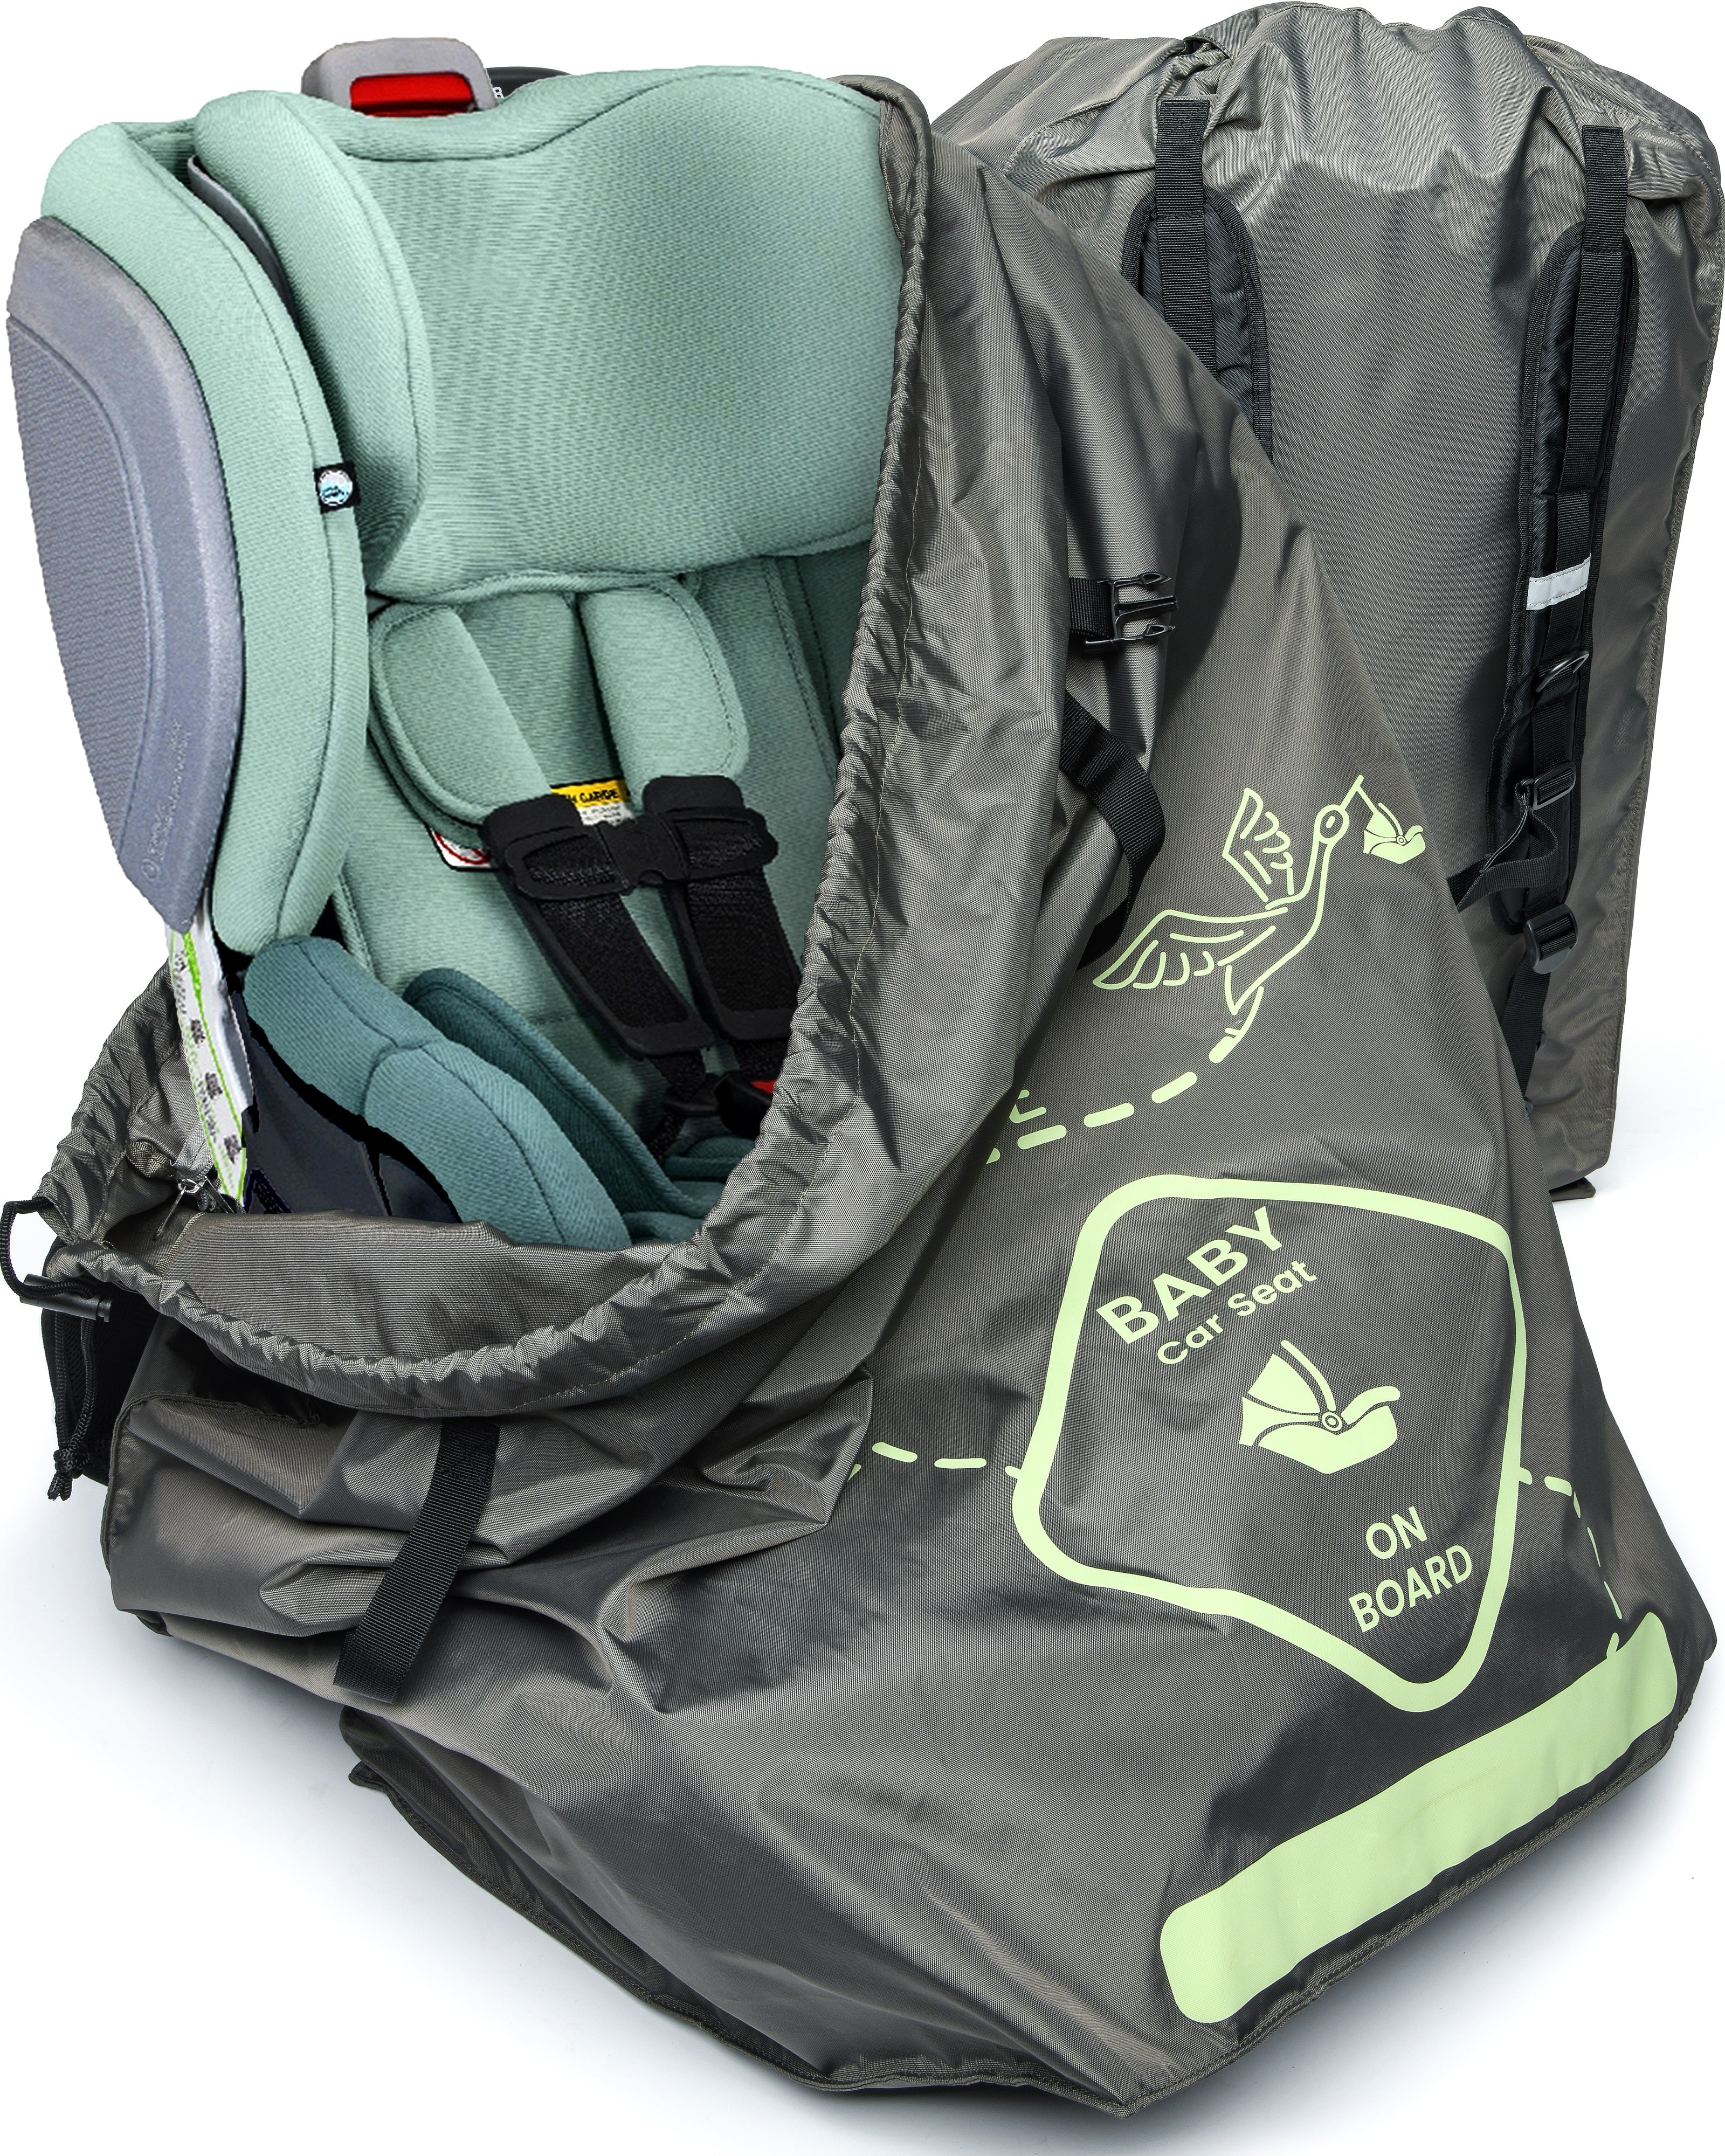 Flyte Gate Check Bag For Car Seats - by The Little Stork